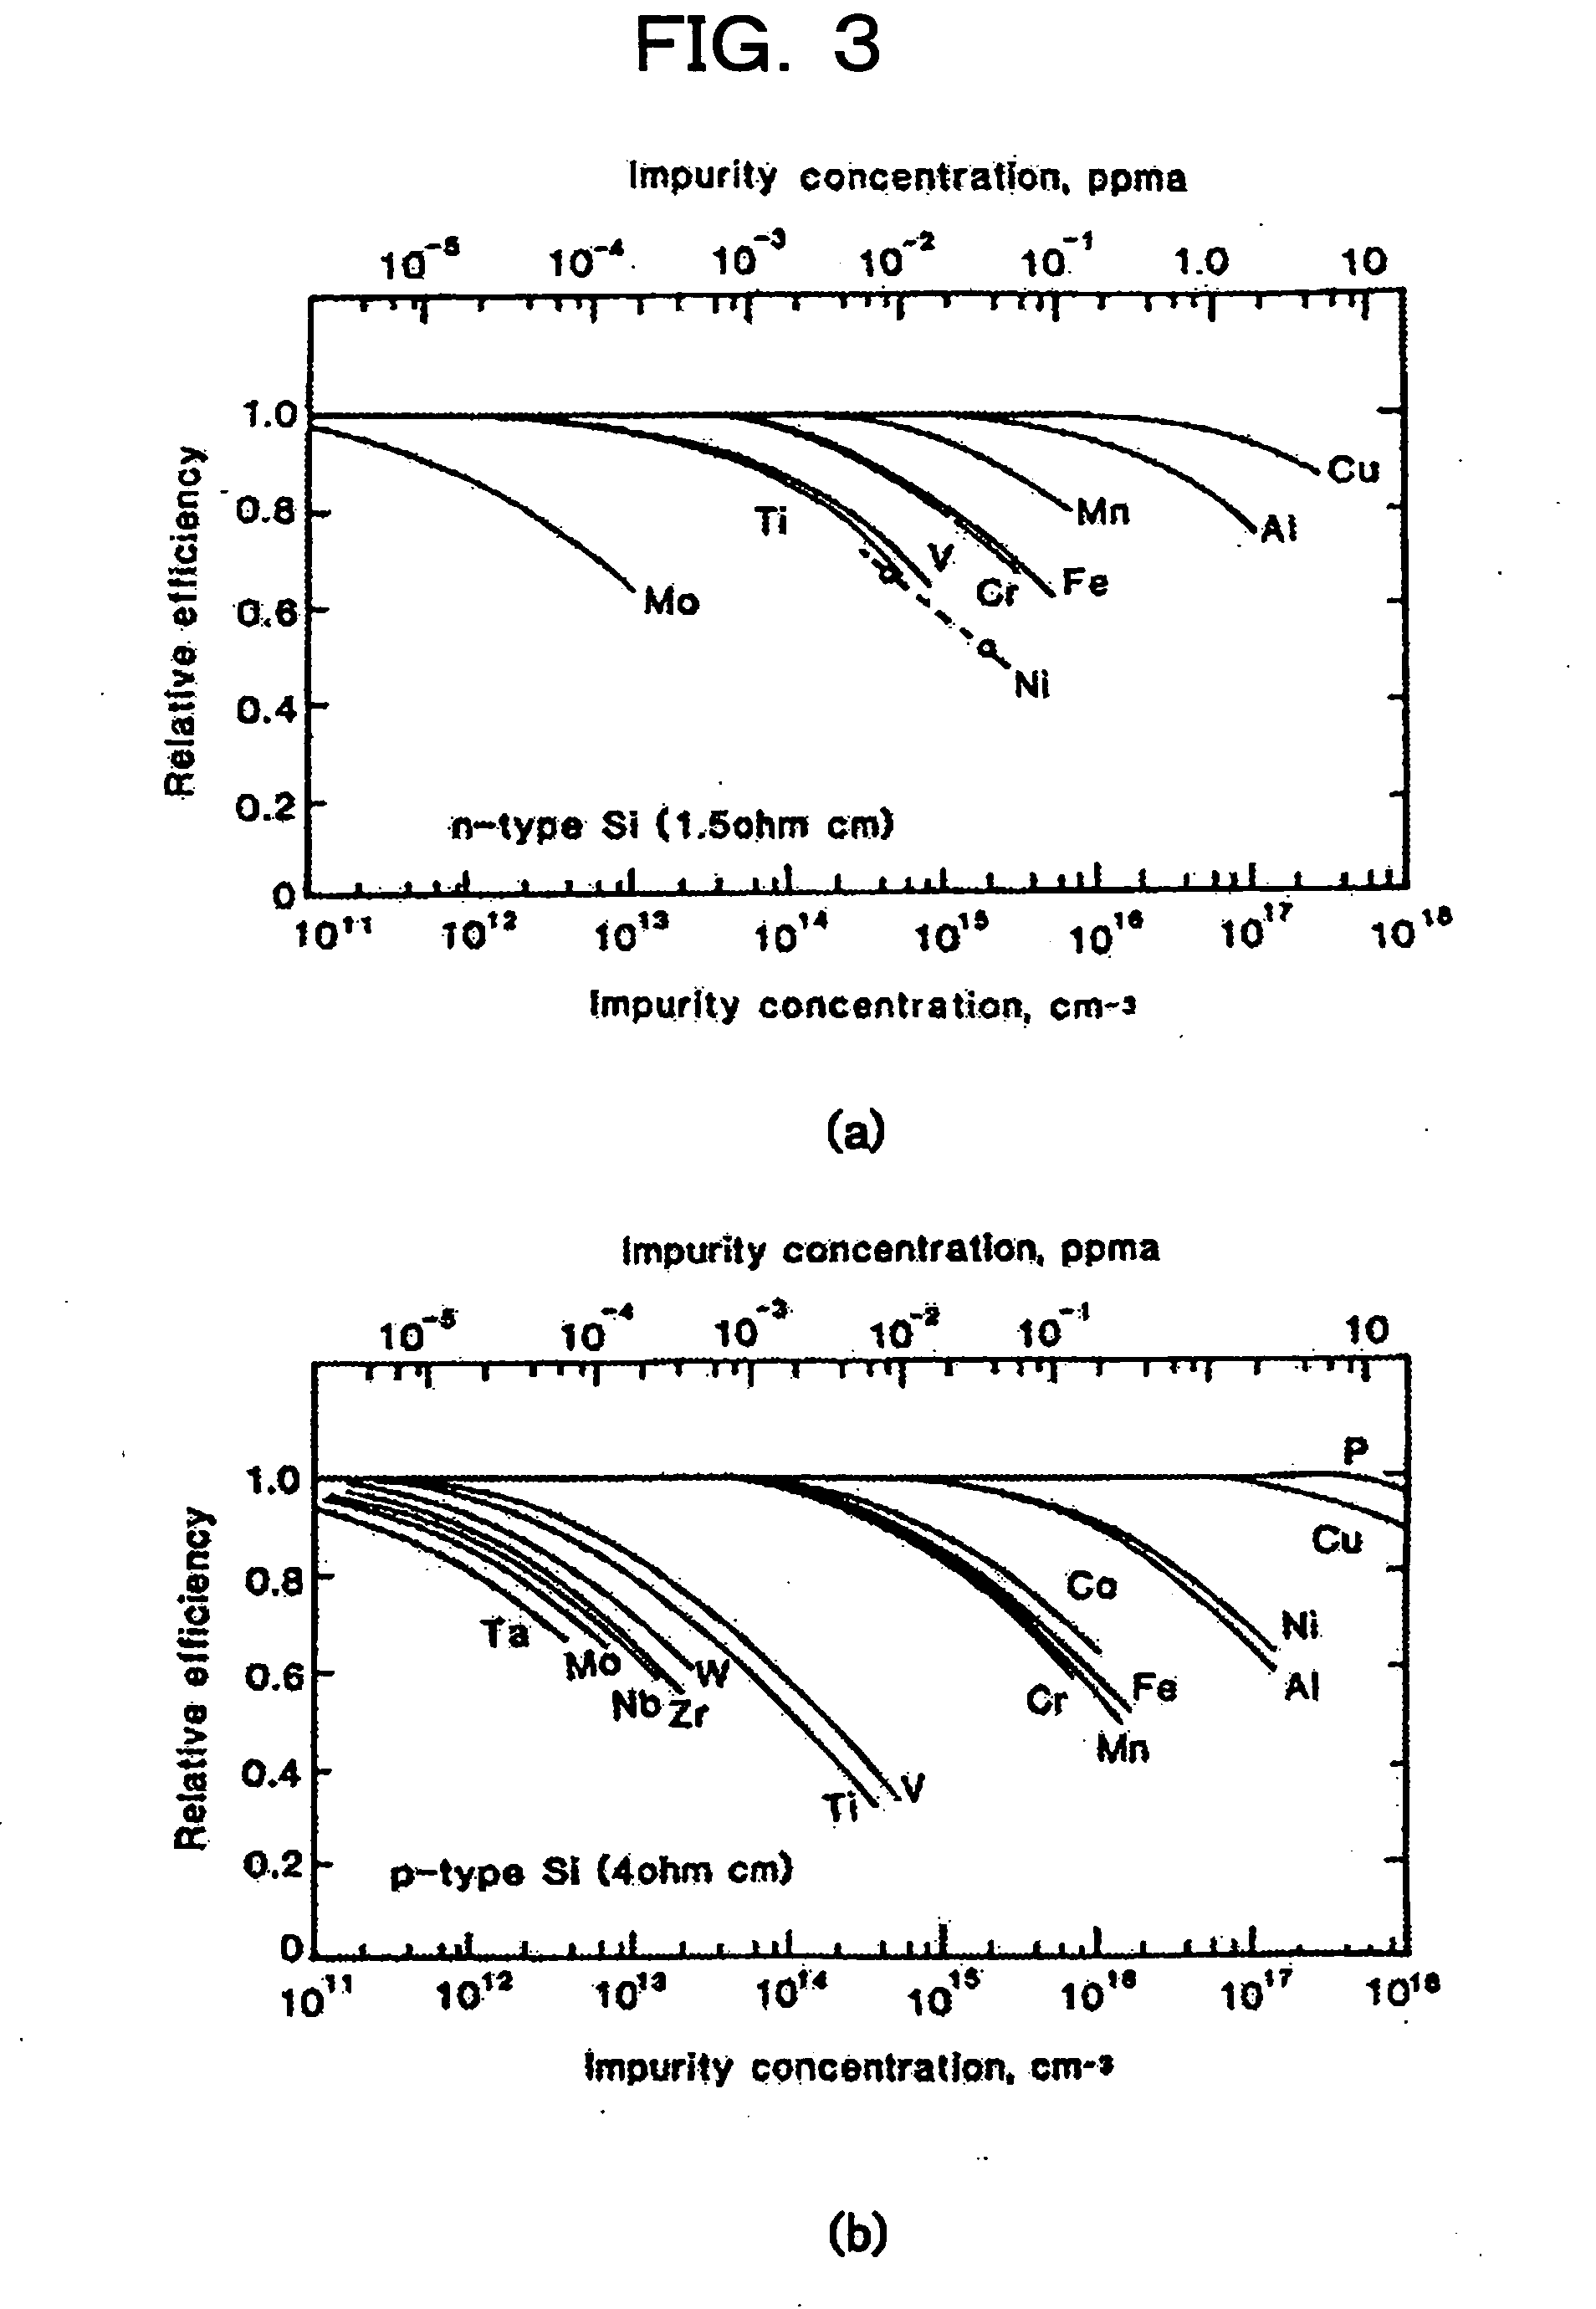 Process for Producing Monocrystal Thin Film and Monocrystal Thin Film Device